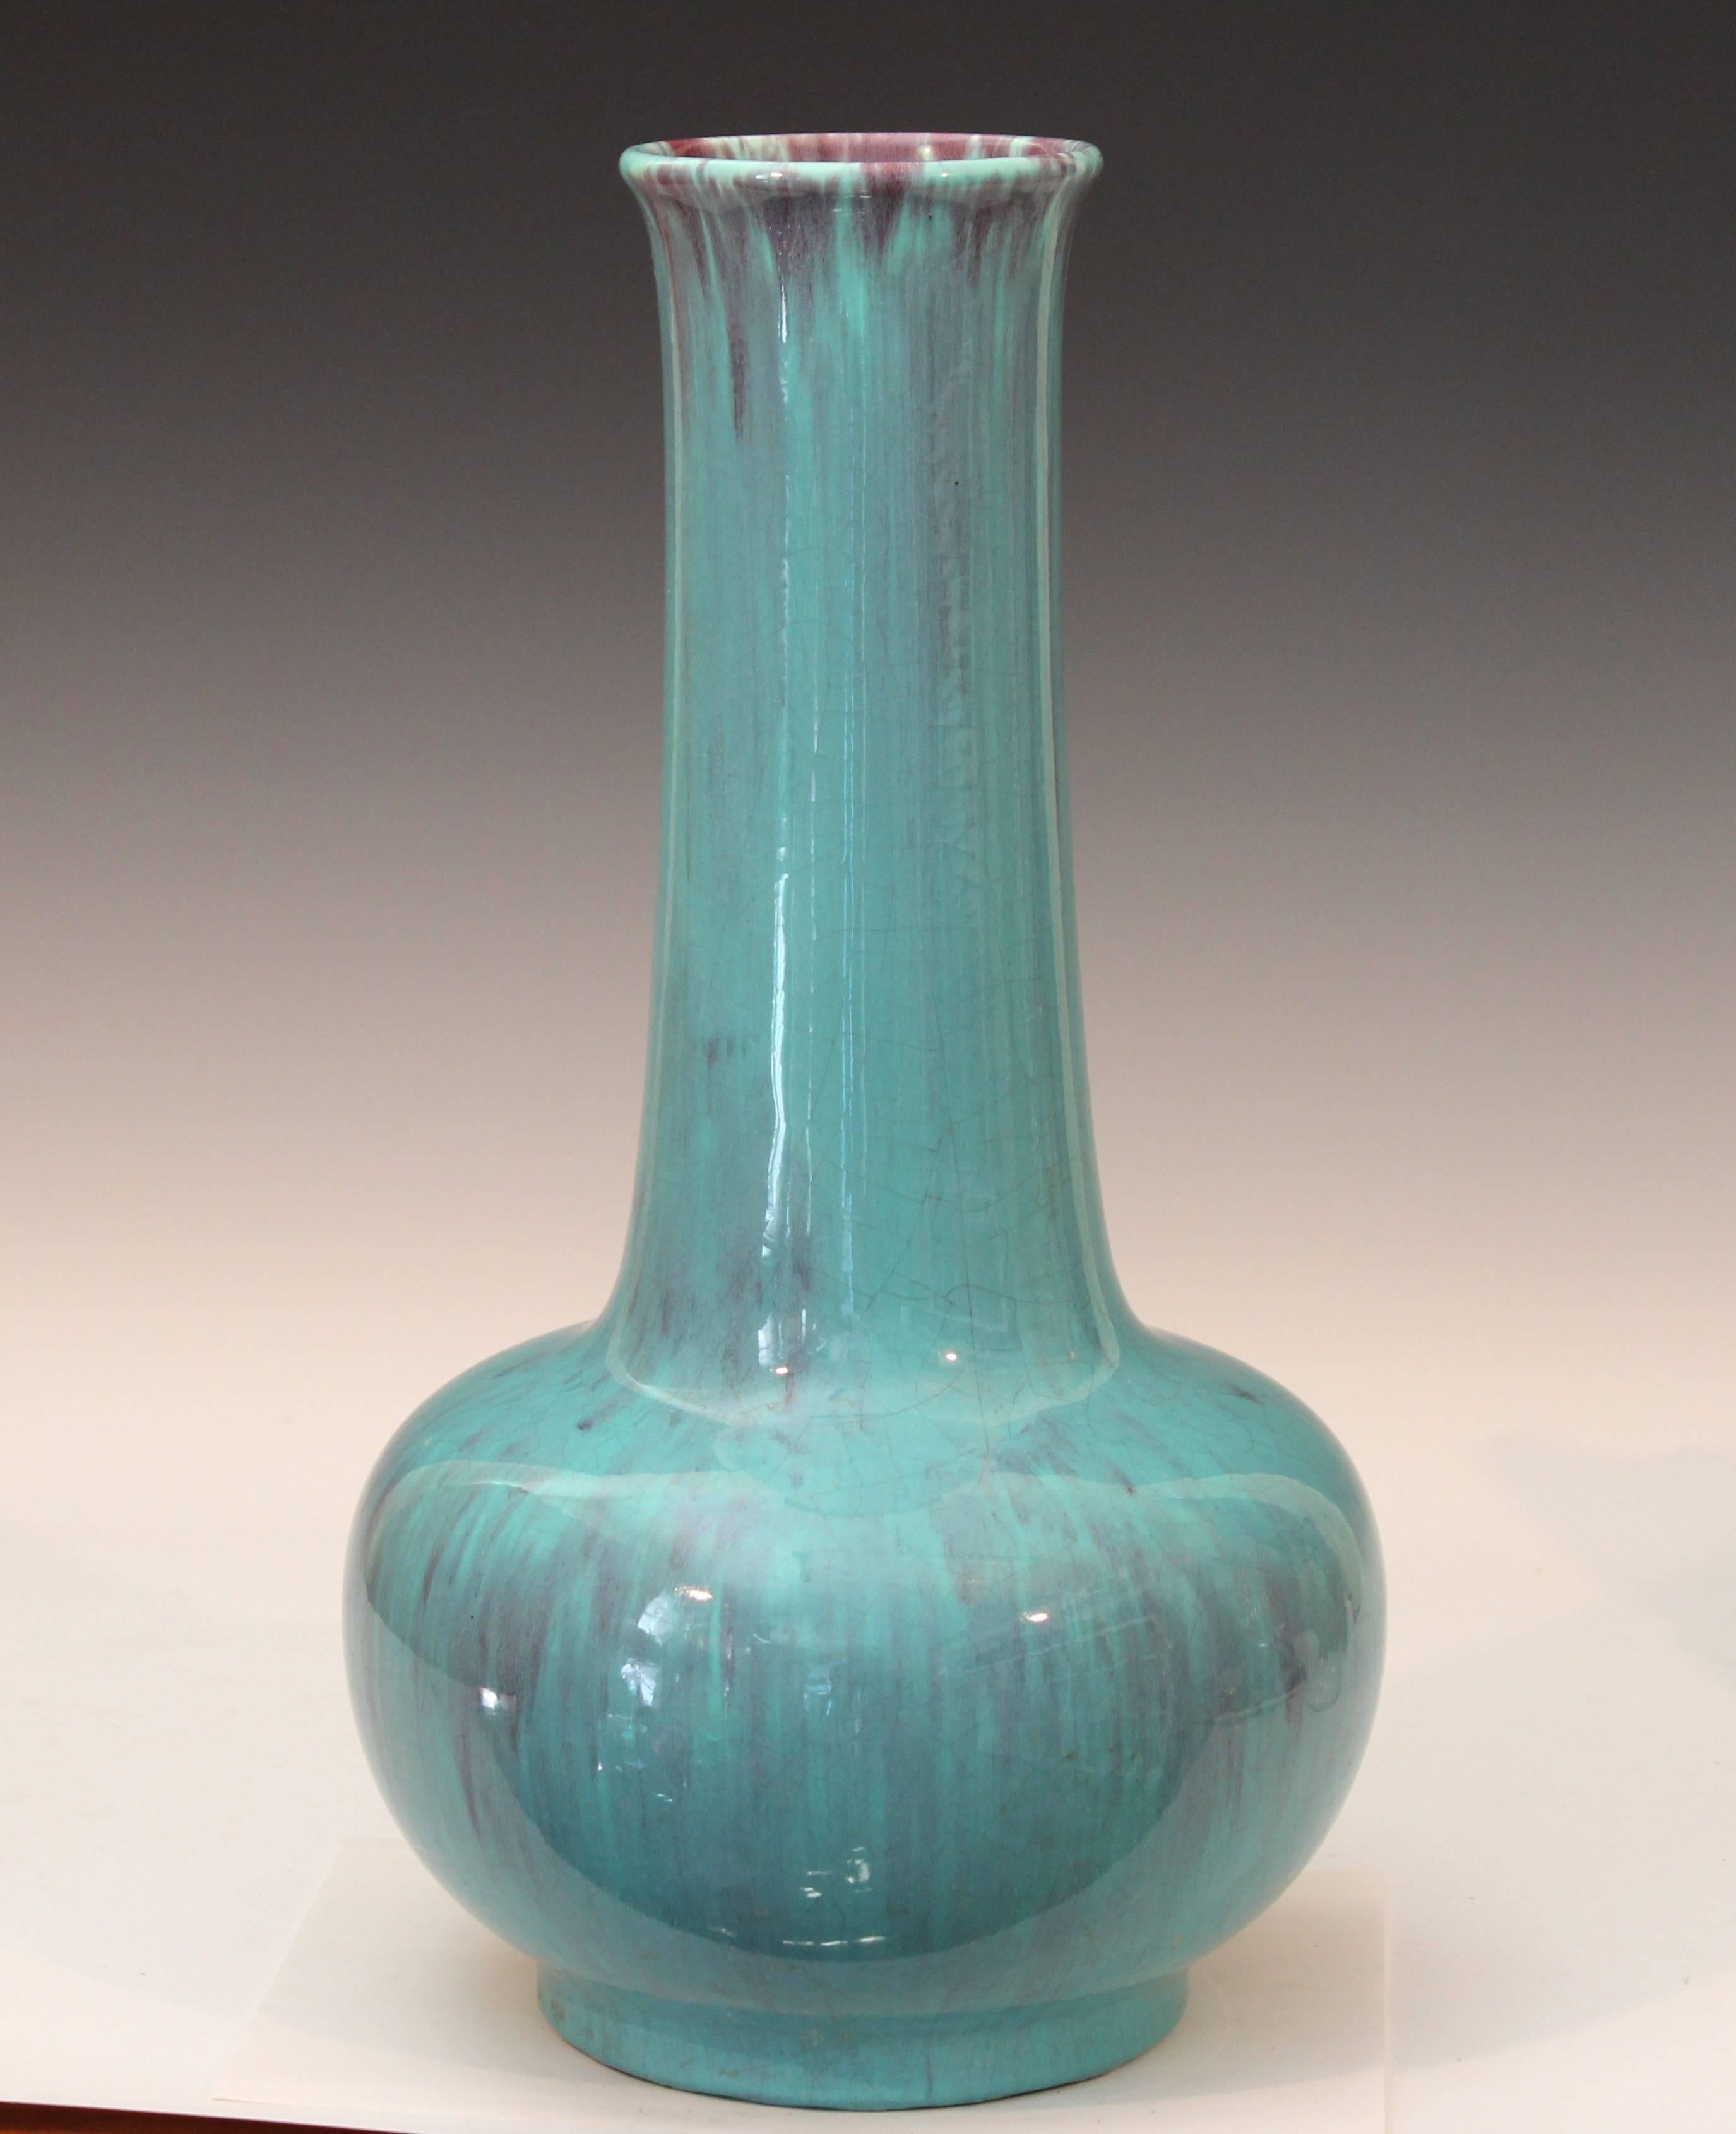 Large antique American Art Pottery vase in Chinese Kangxi form with beautiful turquoise flambe glaze and burgundy highlights, circa early-mid-20th century. Possibly early Haeger or Gladding McBean. Measures: 18" high, 9 1/2" diameter.